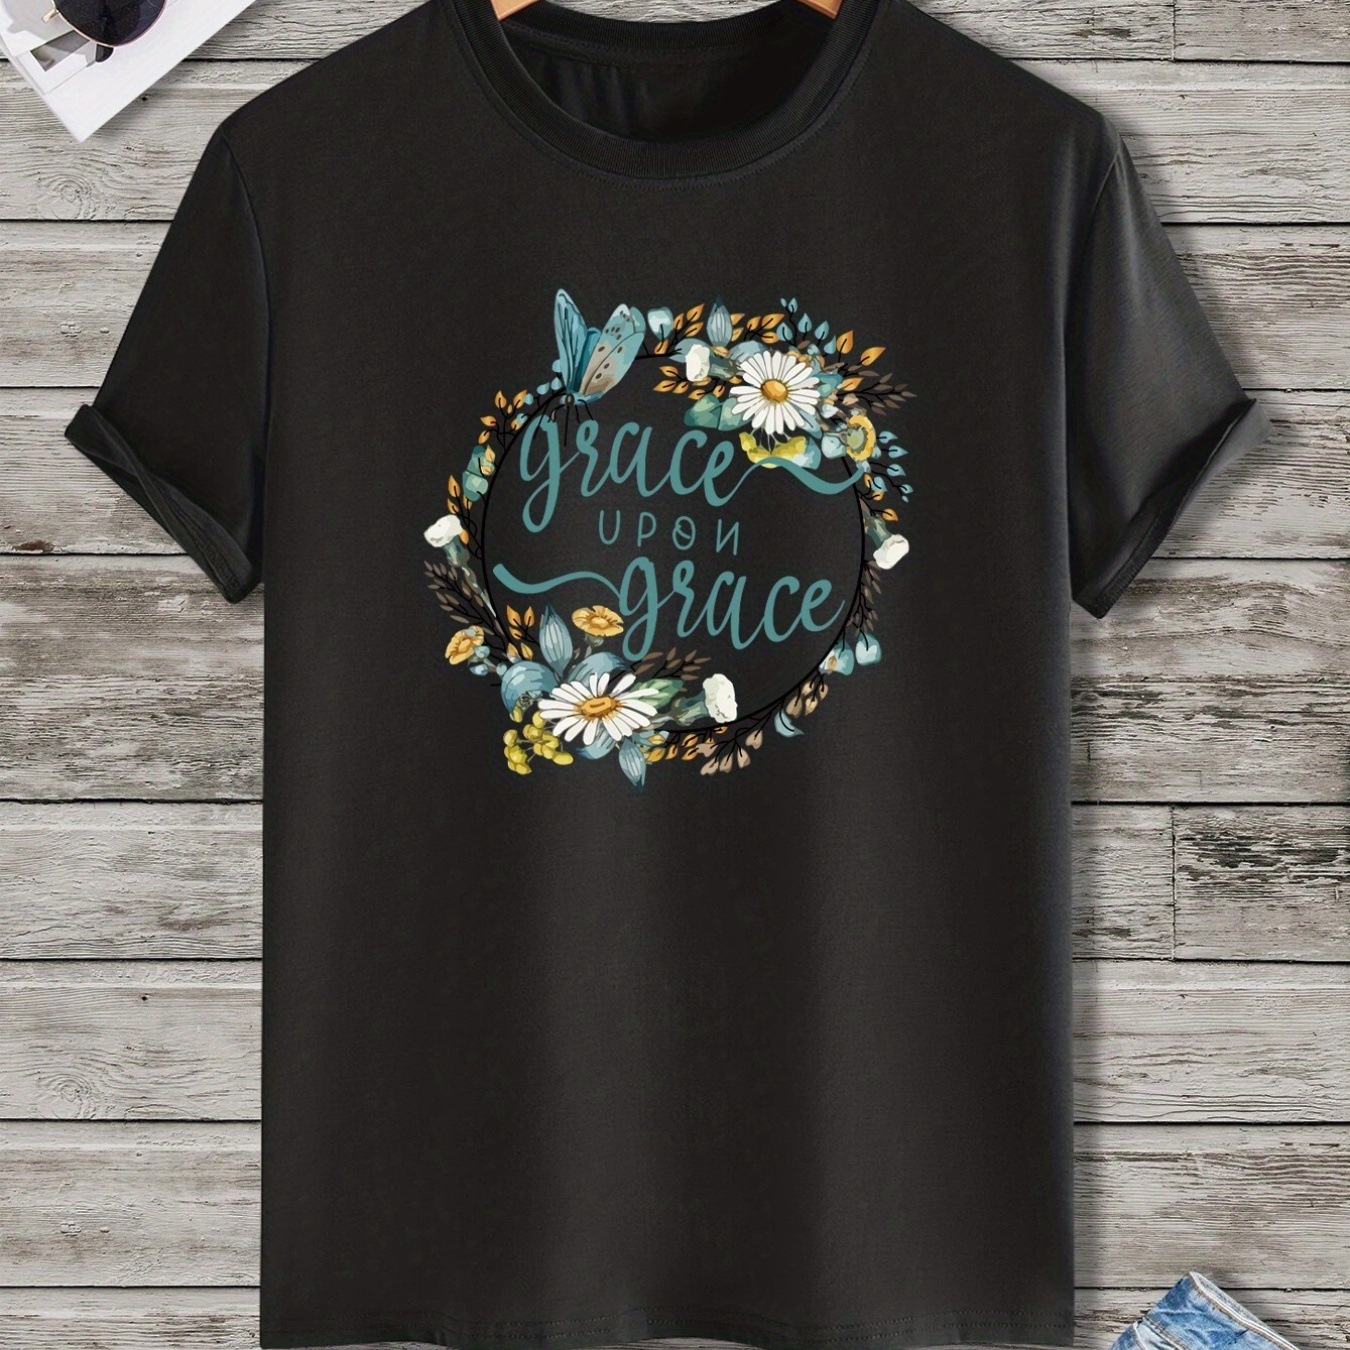 

'grace Upon Grace' Round Neck T-shirts, Causal Tees, Short Sleeves Tops, Men's Summer Clothing